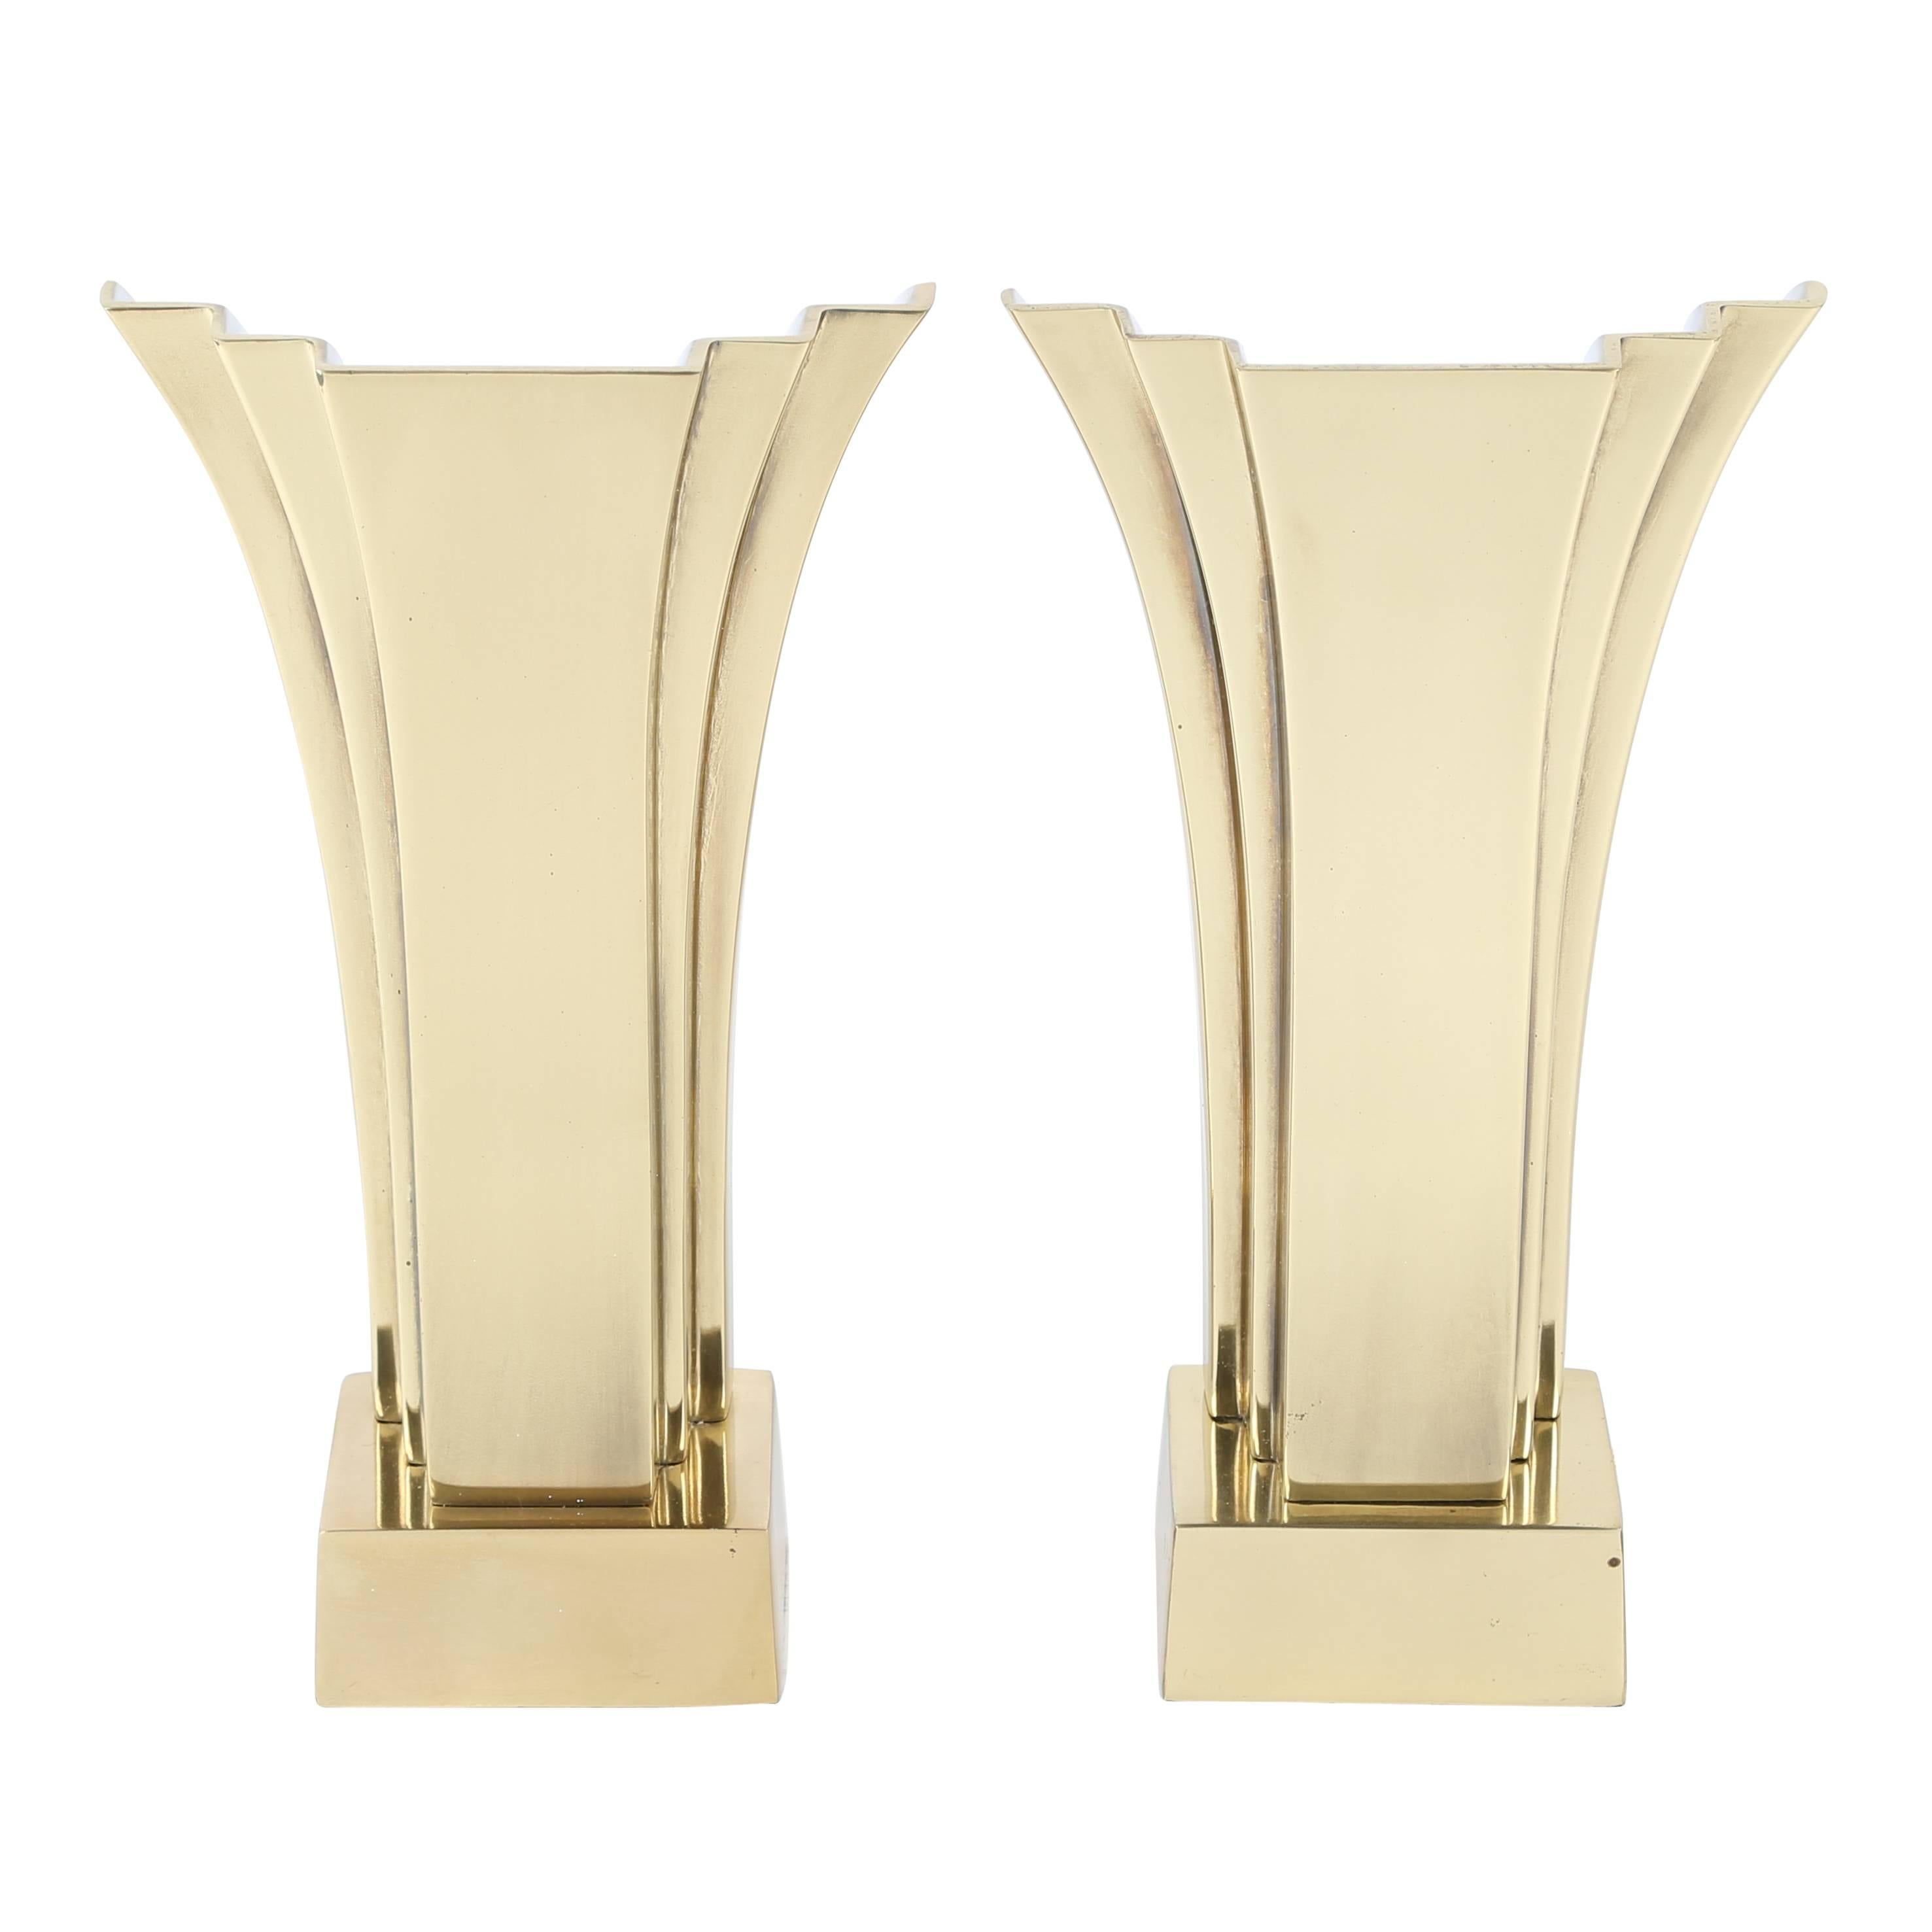 Pair of Petit Art Deco Revival Brass Accent Lamps by Stiffel, circa 1970s